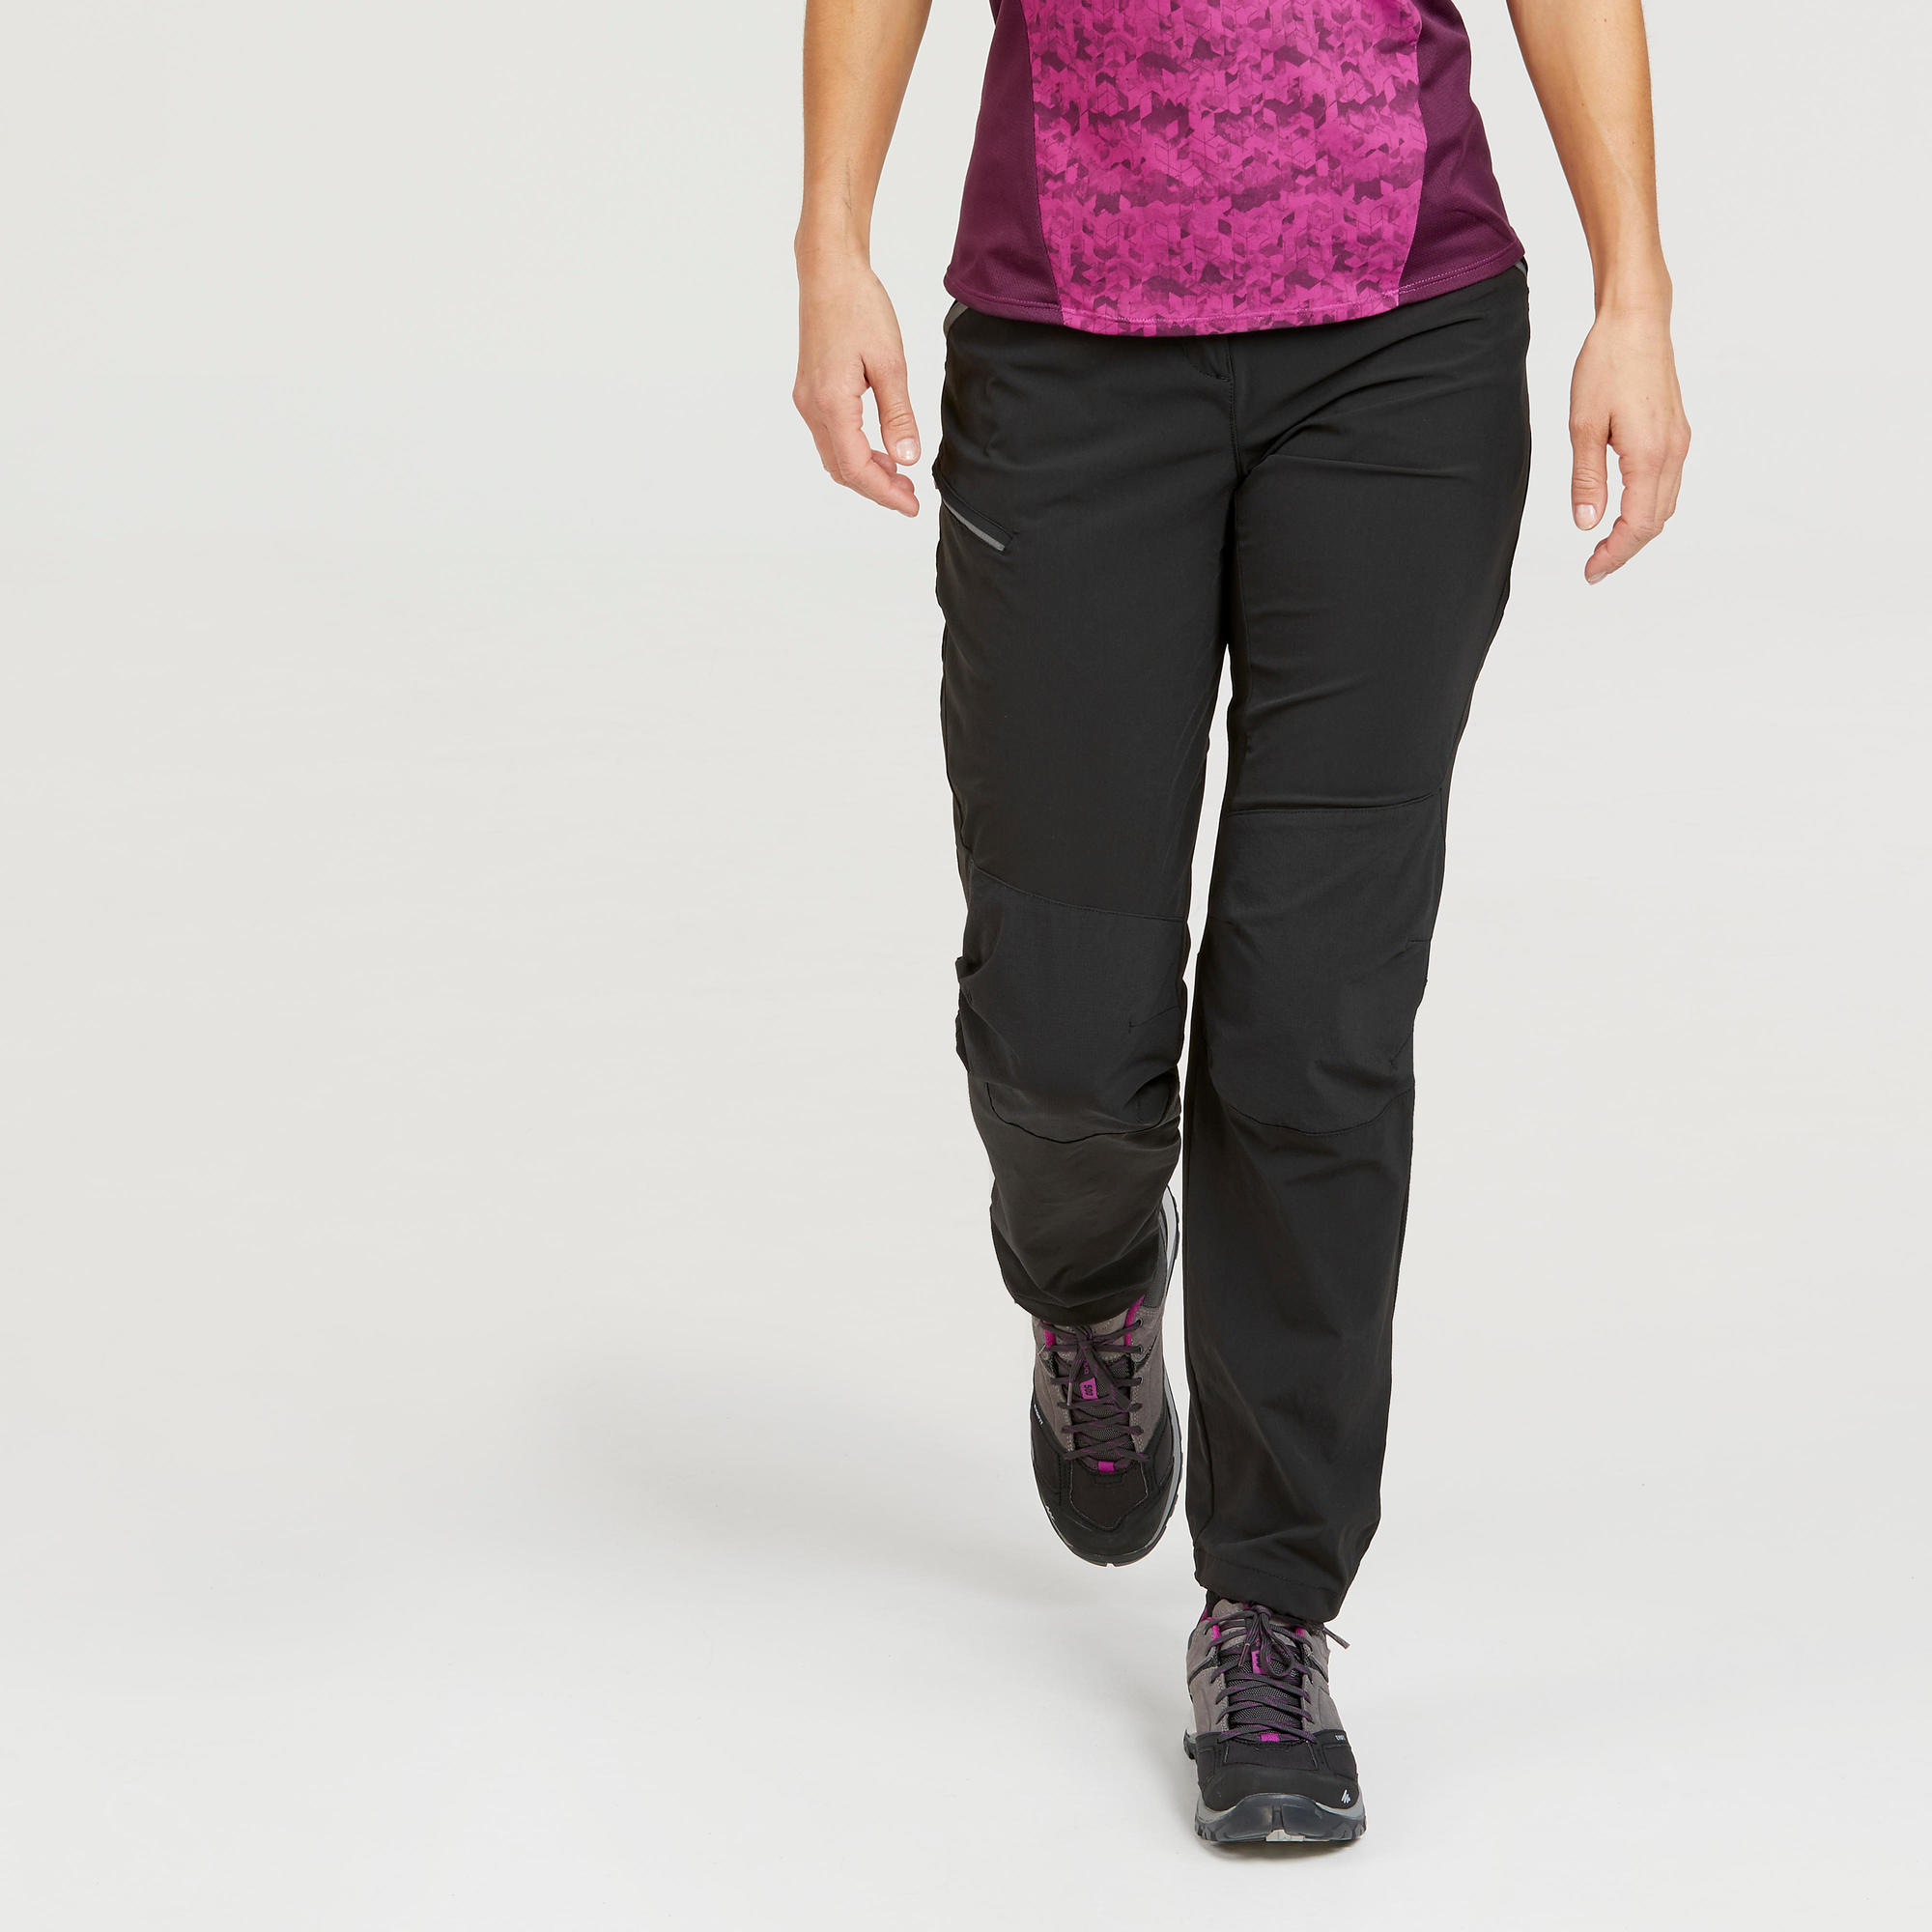 MH500, Hiking Pants, Women's - image 2 of 11